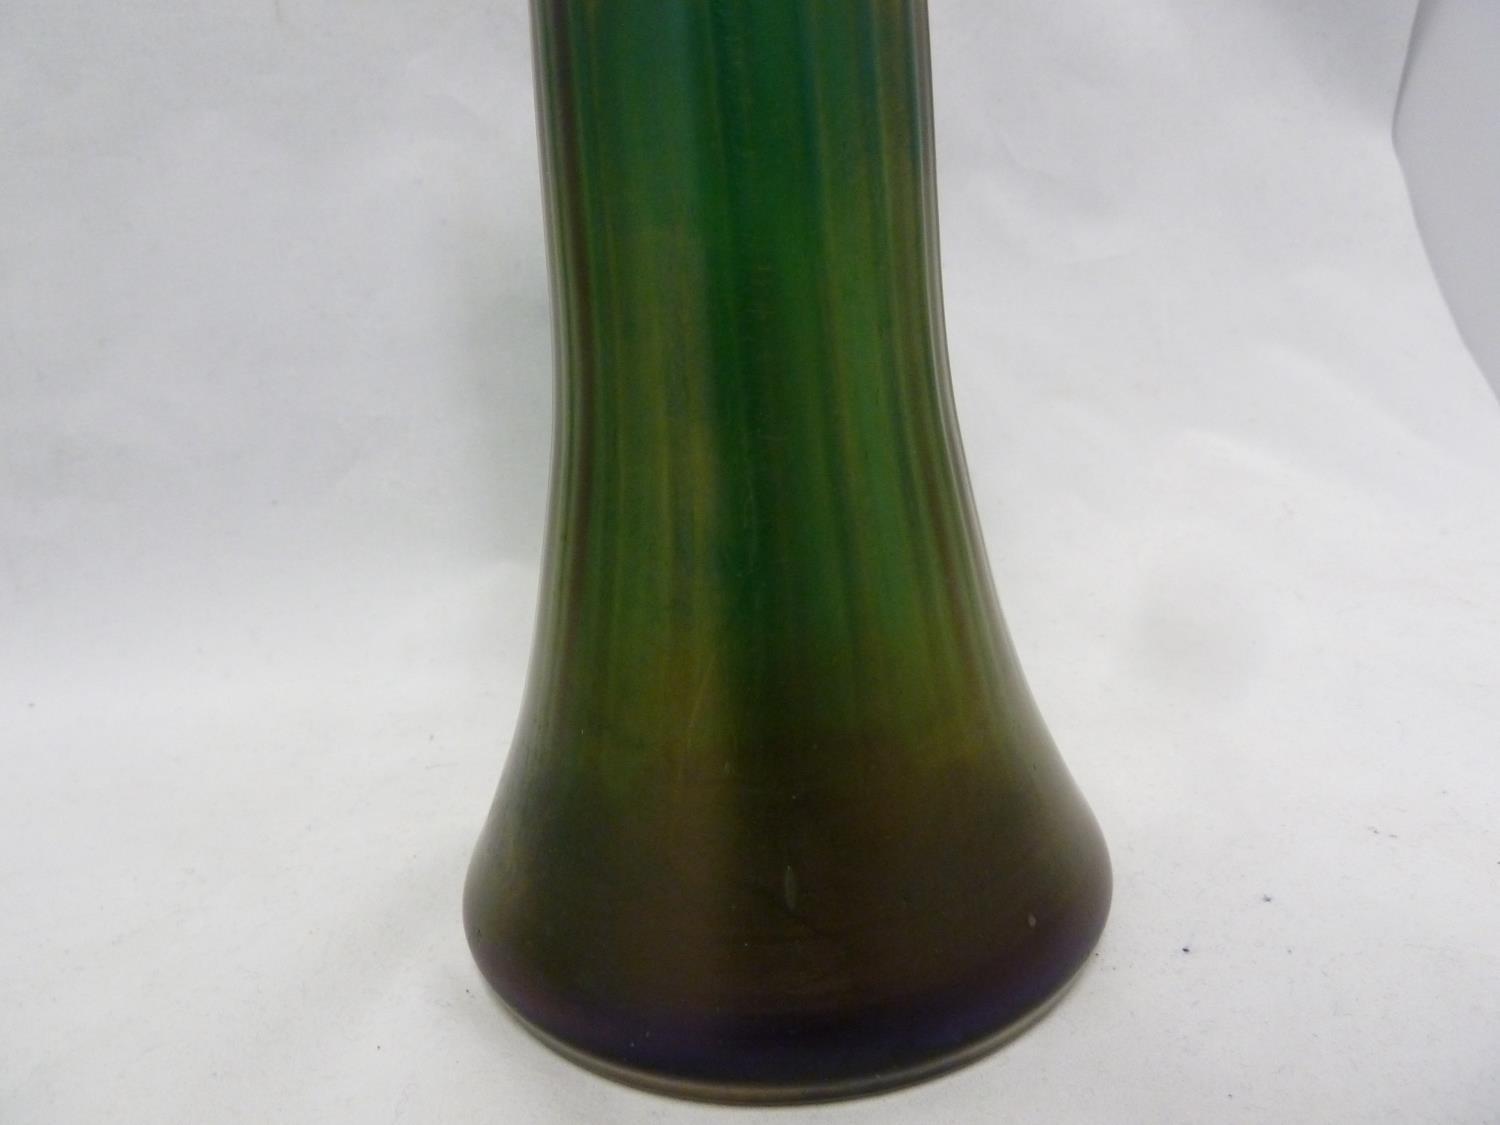 Kralik - An iridescent green glass vase, in Loetz style, of flared cylindrical form with wavy rim, - Image 4 of 5